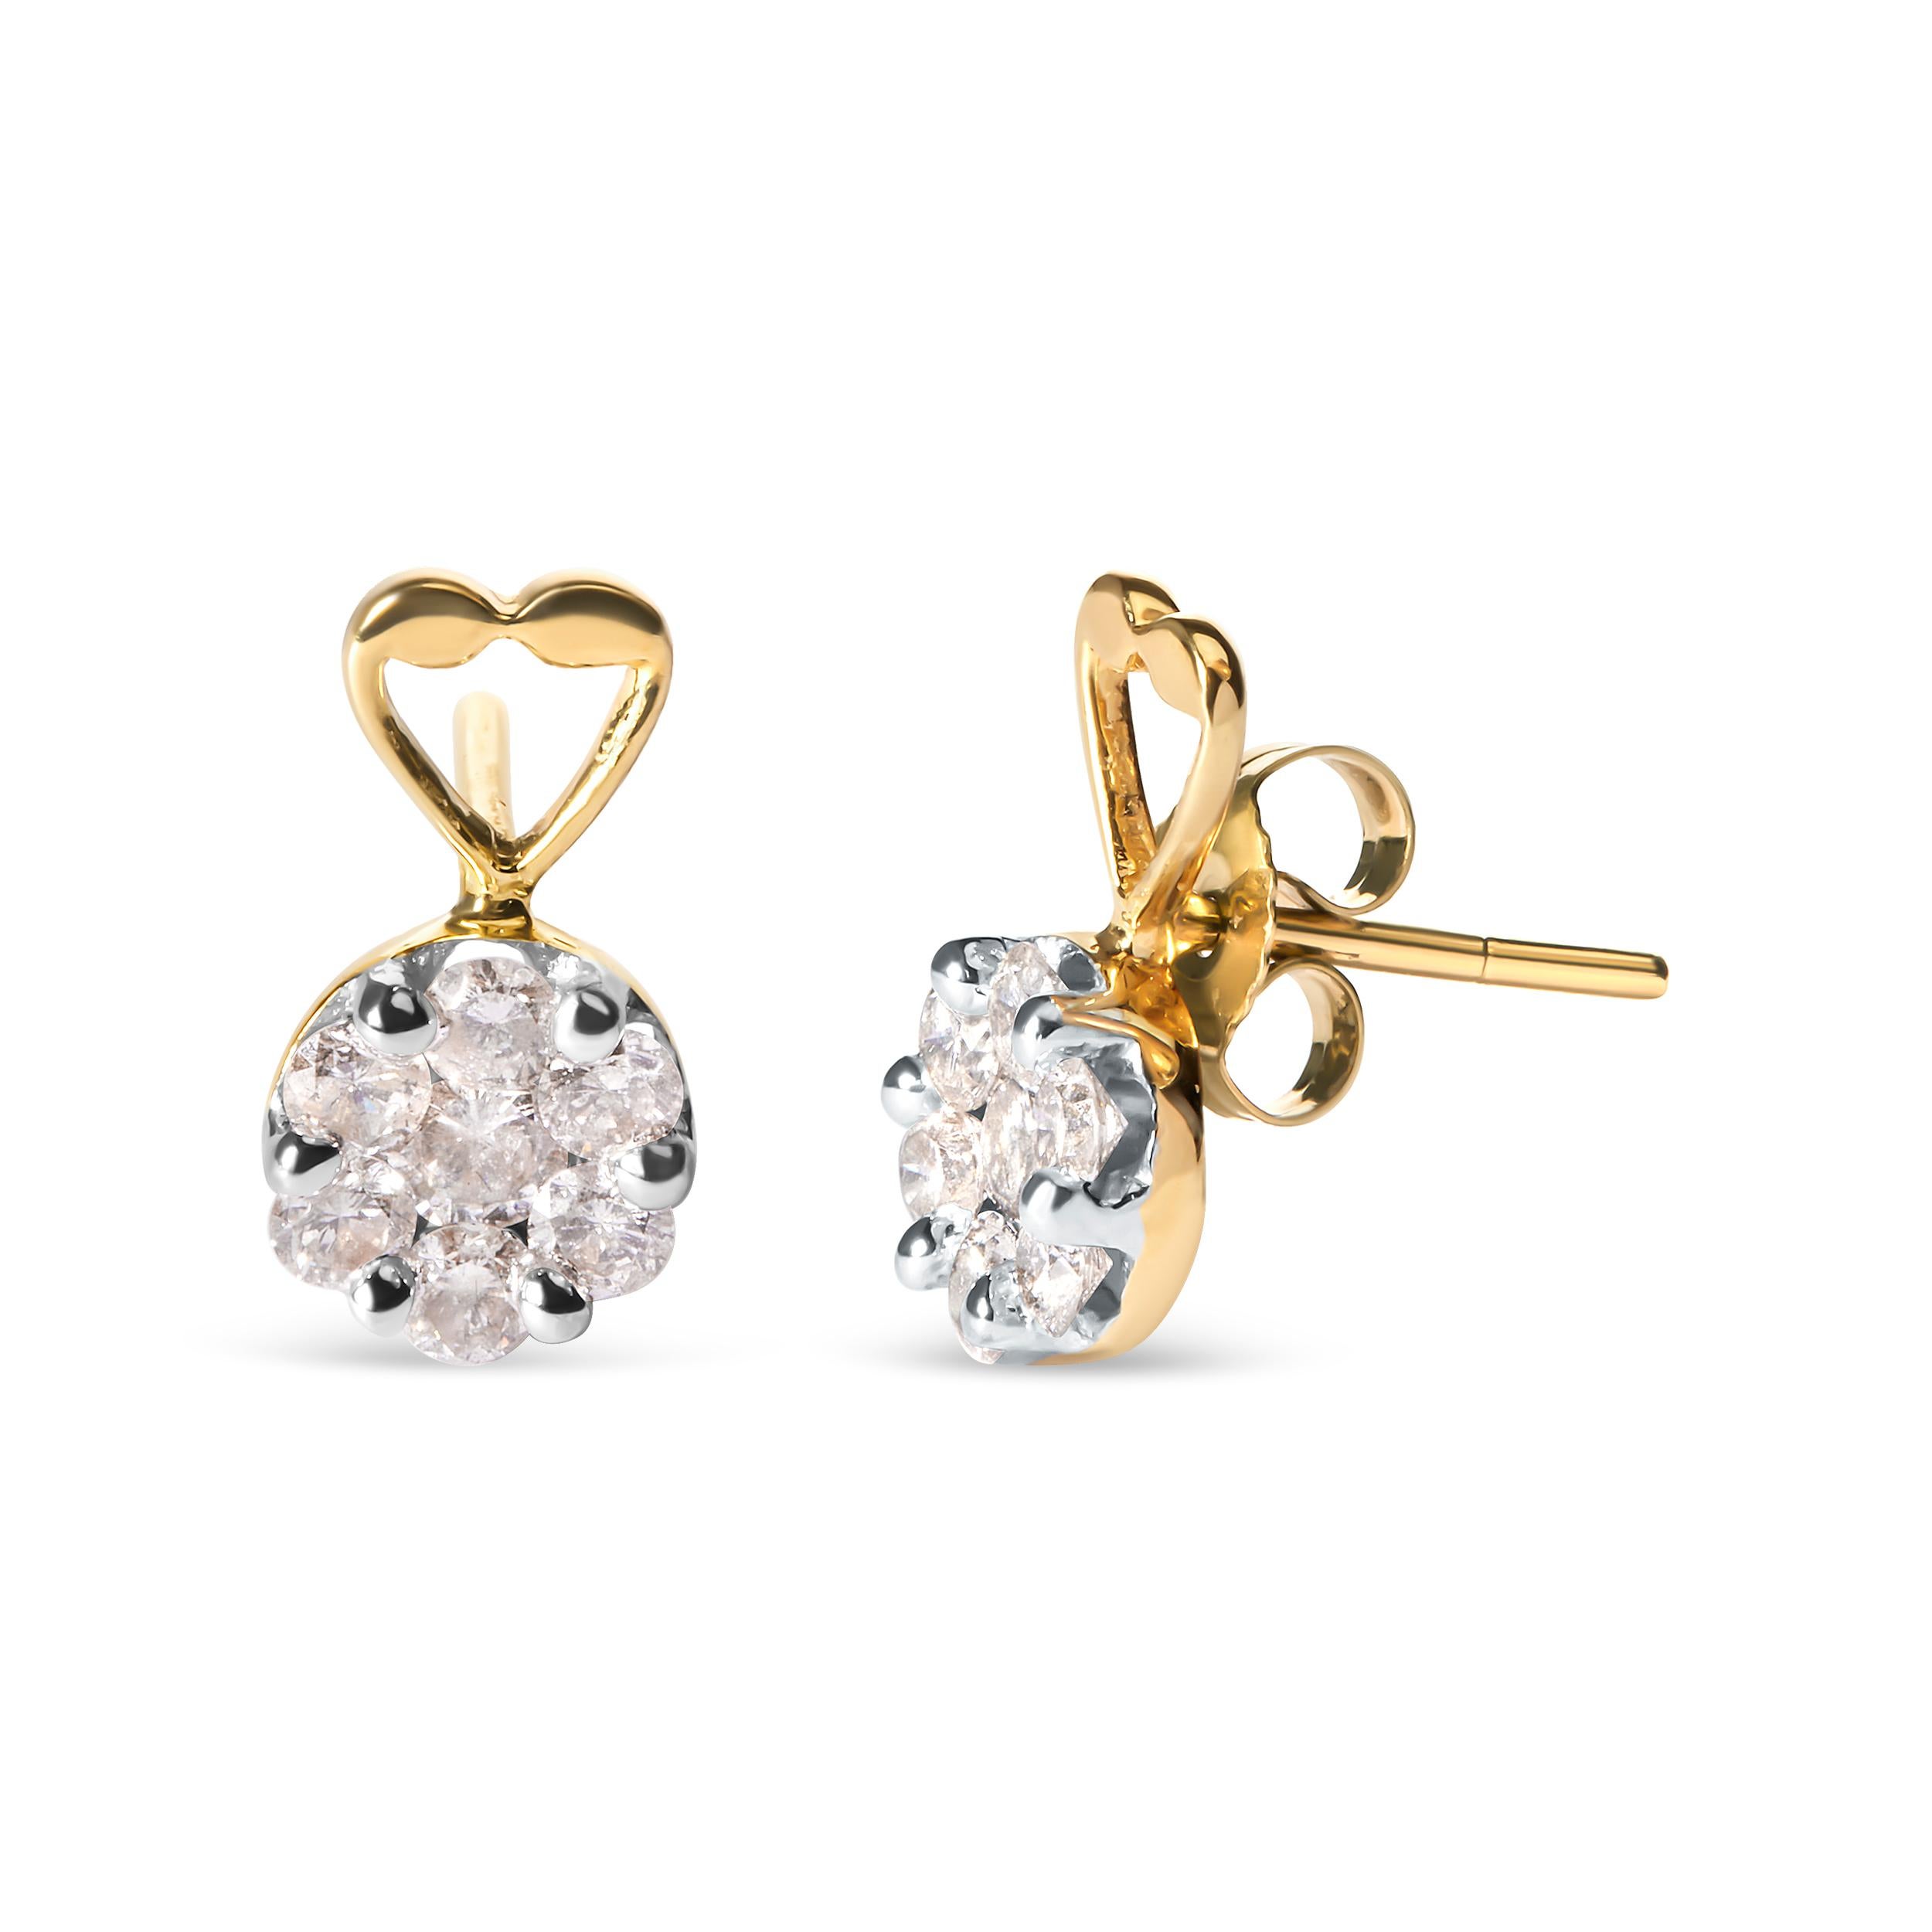 Every piece of jewelry has a little story behind it and define yours with these exquisite earrings. Created with 14 karats yellow gold, the earrings feature heart accent on the top. Both the earrings are ornate with shimmering round cut diamonds